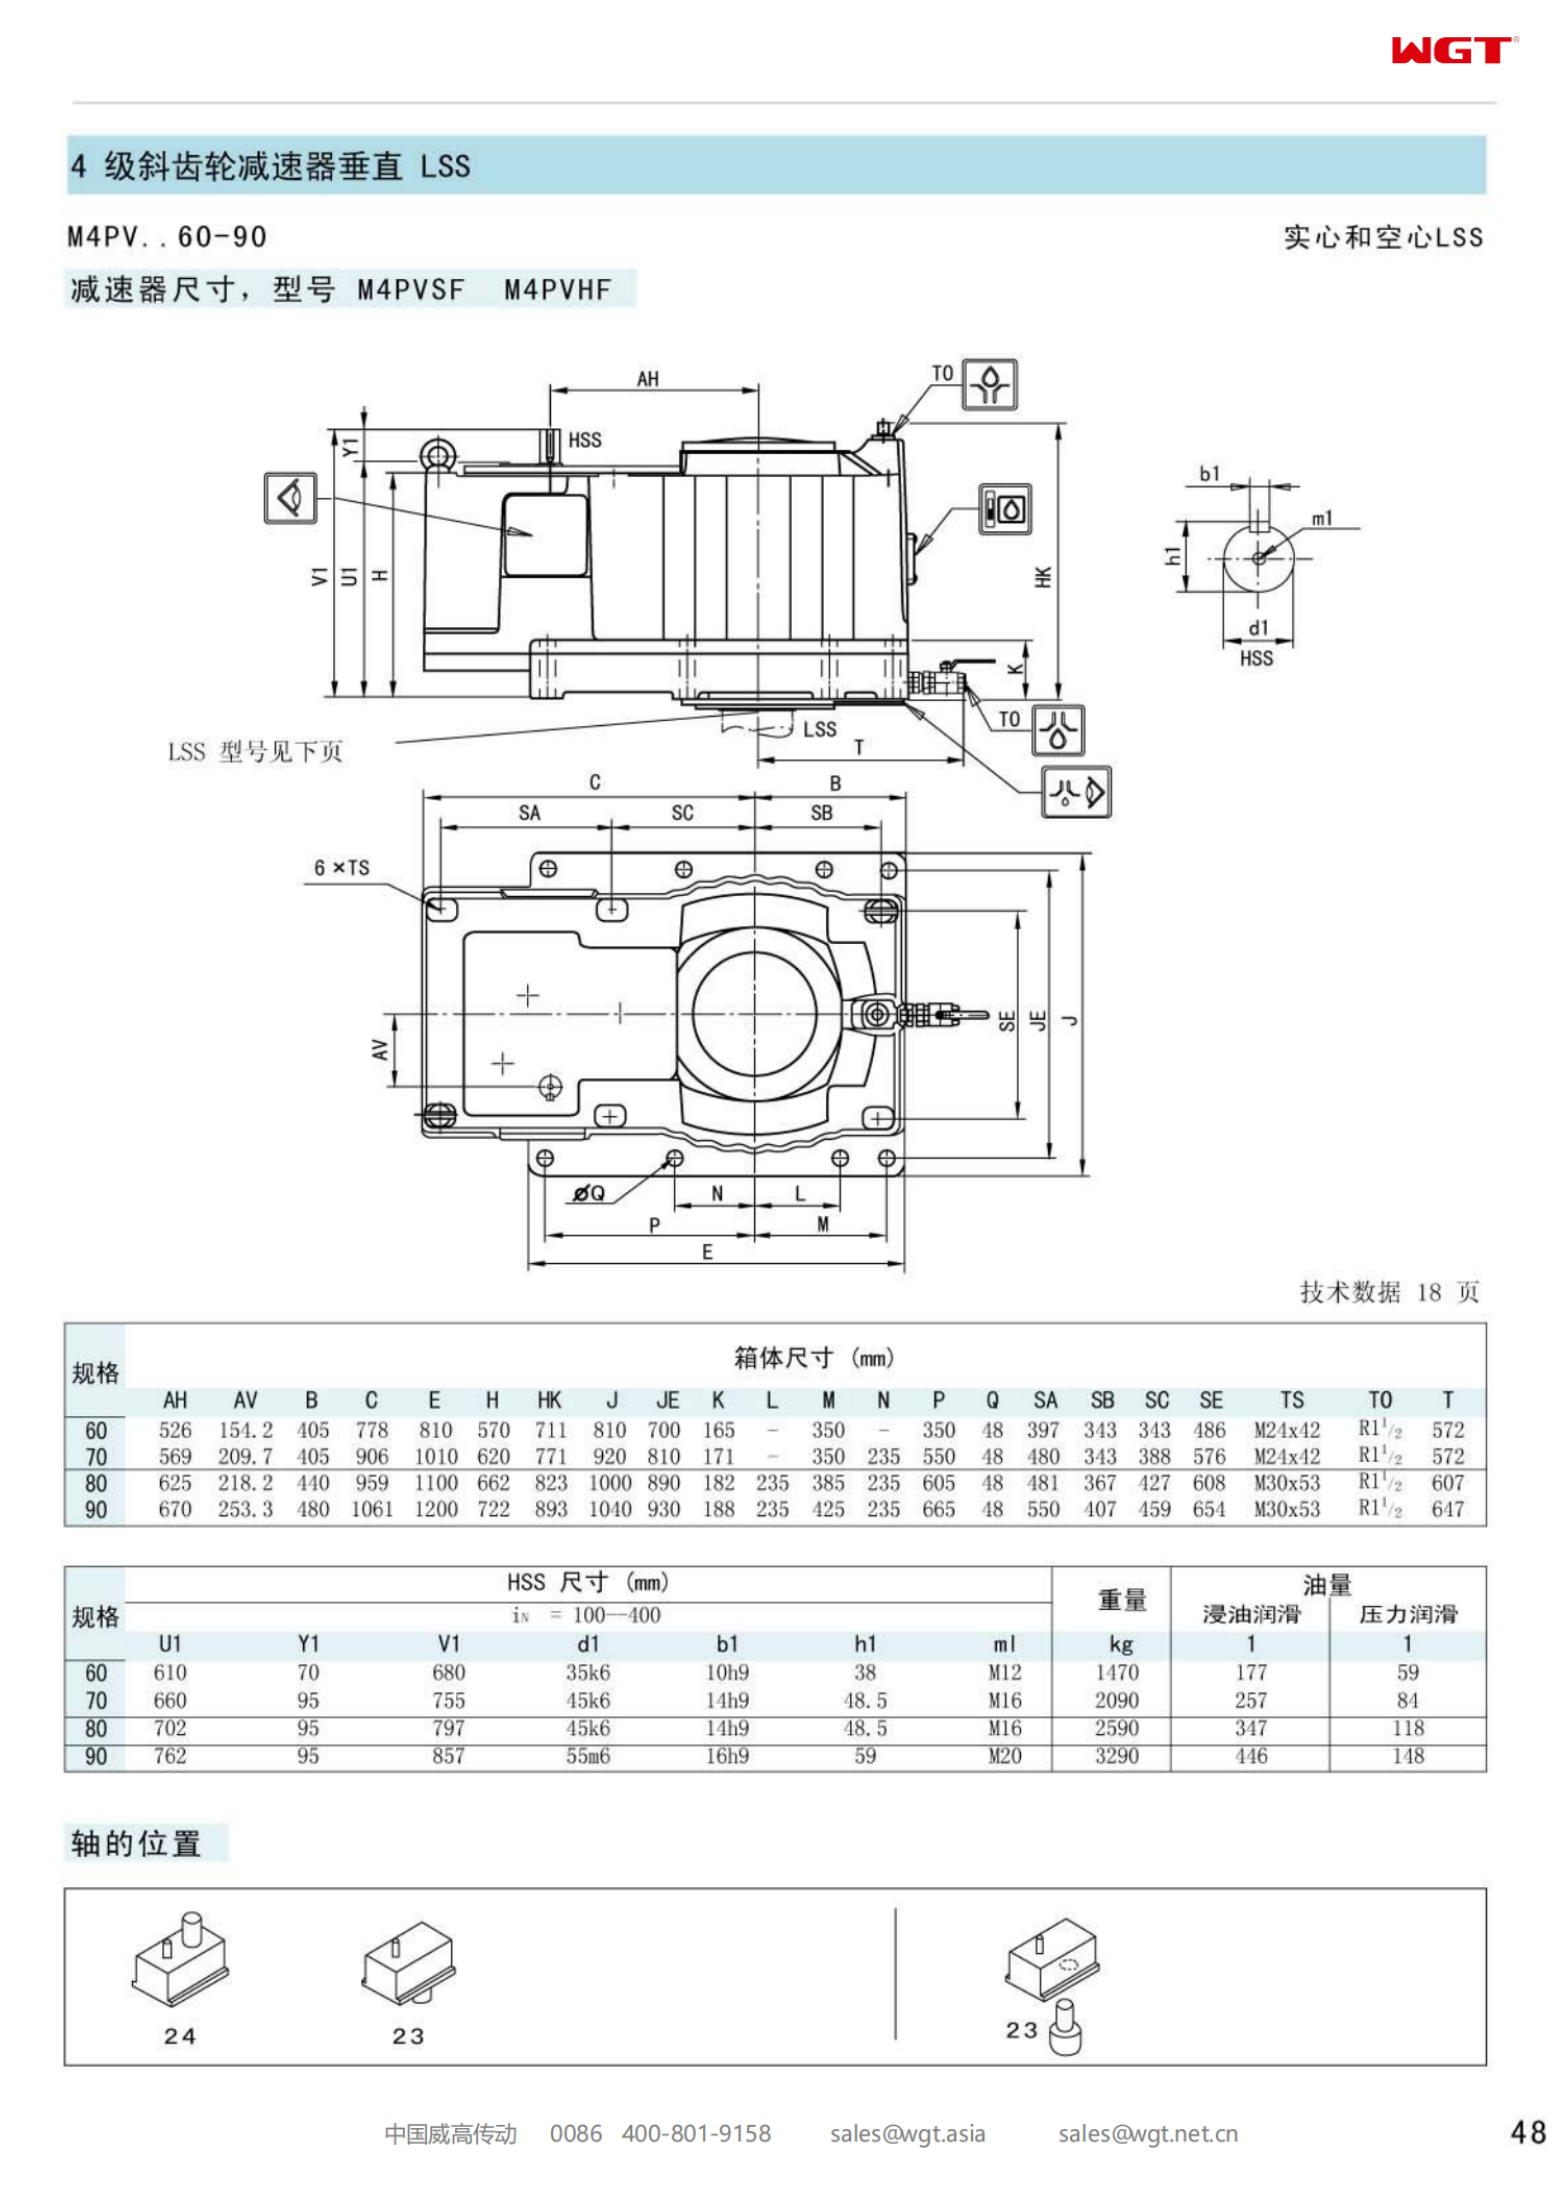 M4PVSF80 Replace_SEW_M_Series Gearbox